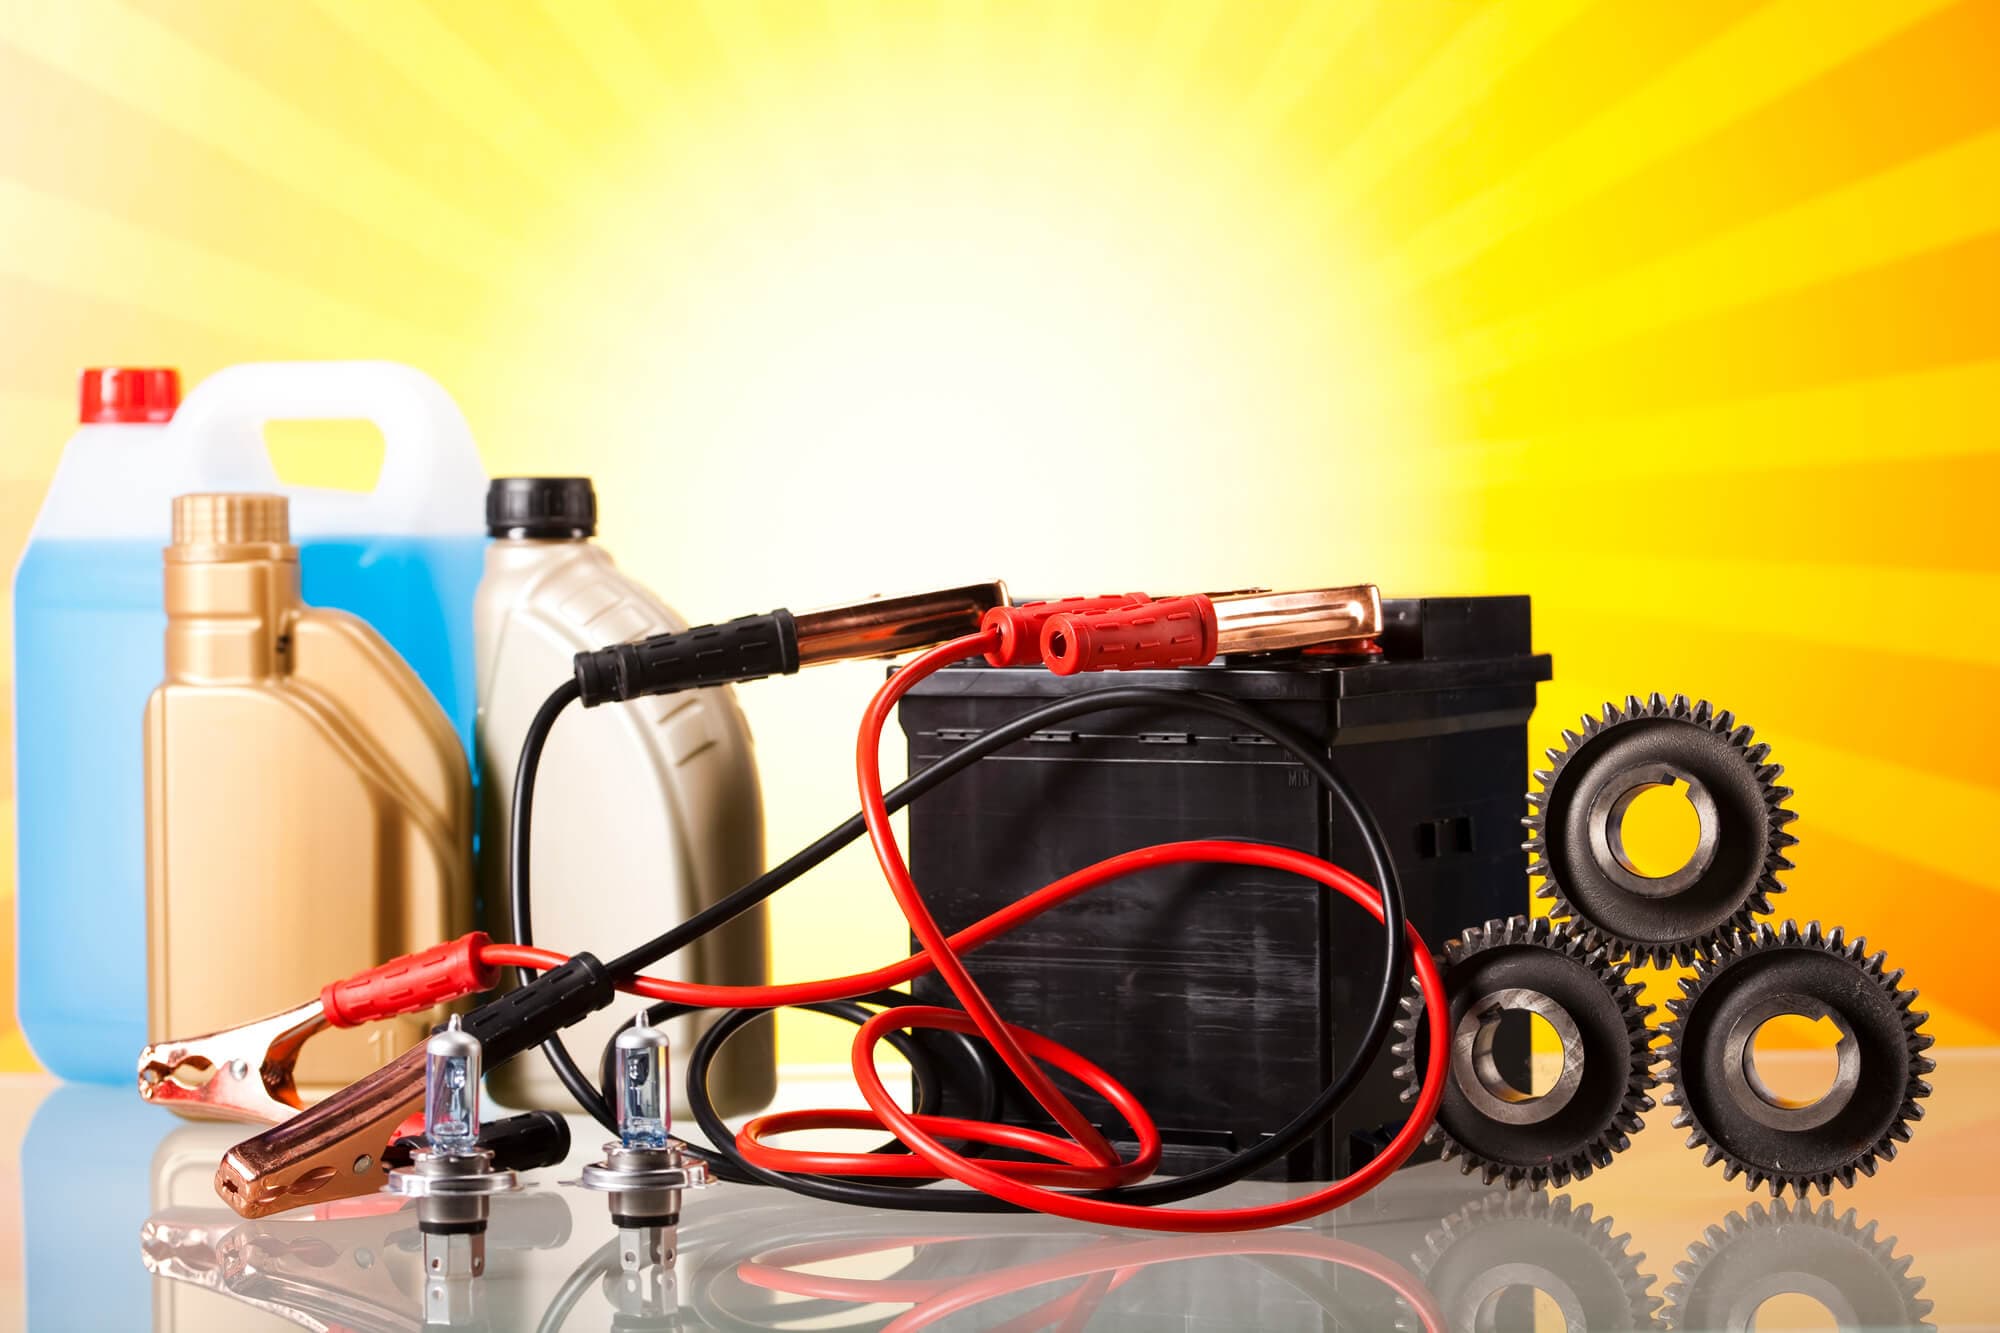 Best Car Batteries For Hot Weather: Top Picks for Summer Temps